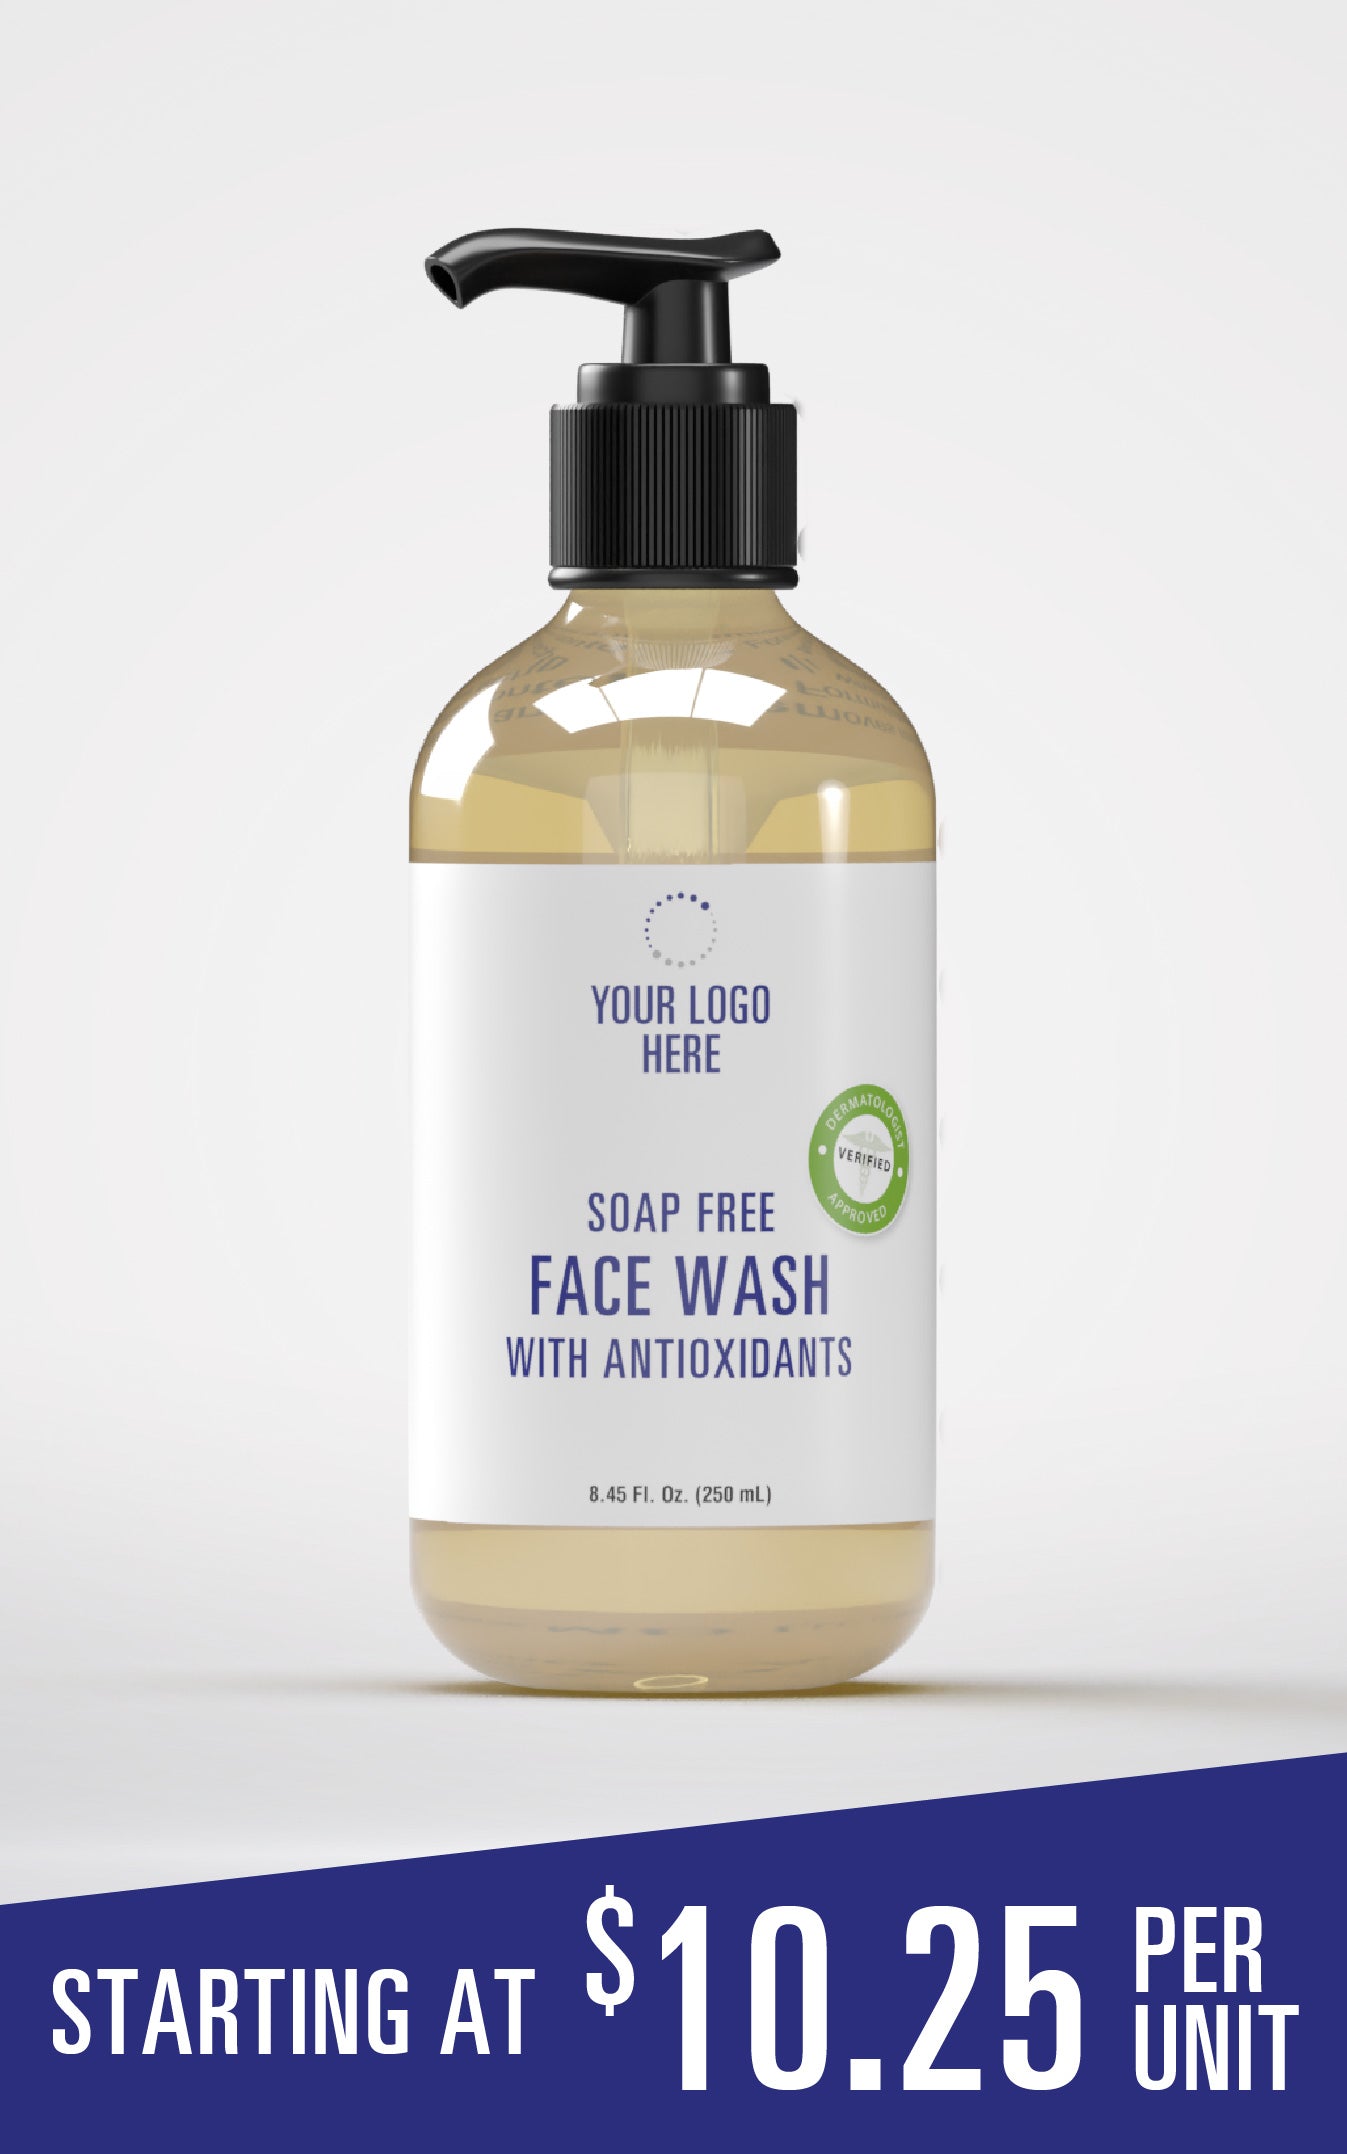 Soap Free Face Wash with Antioxidants